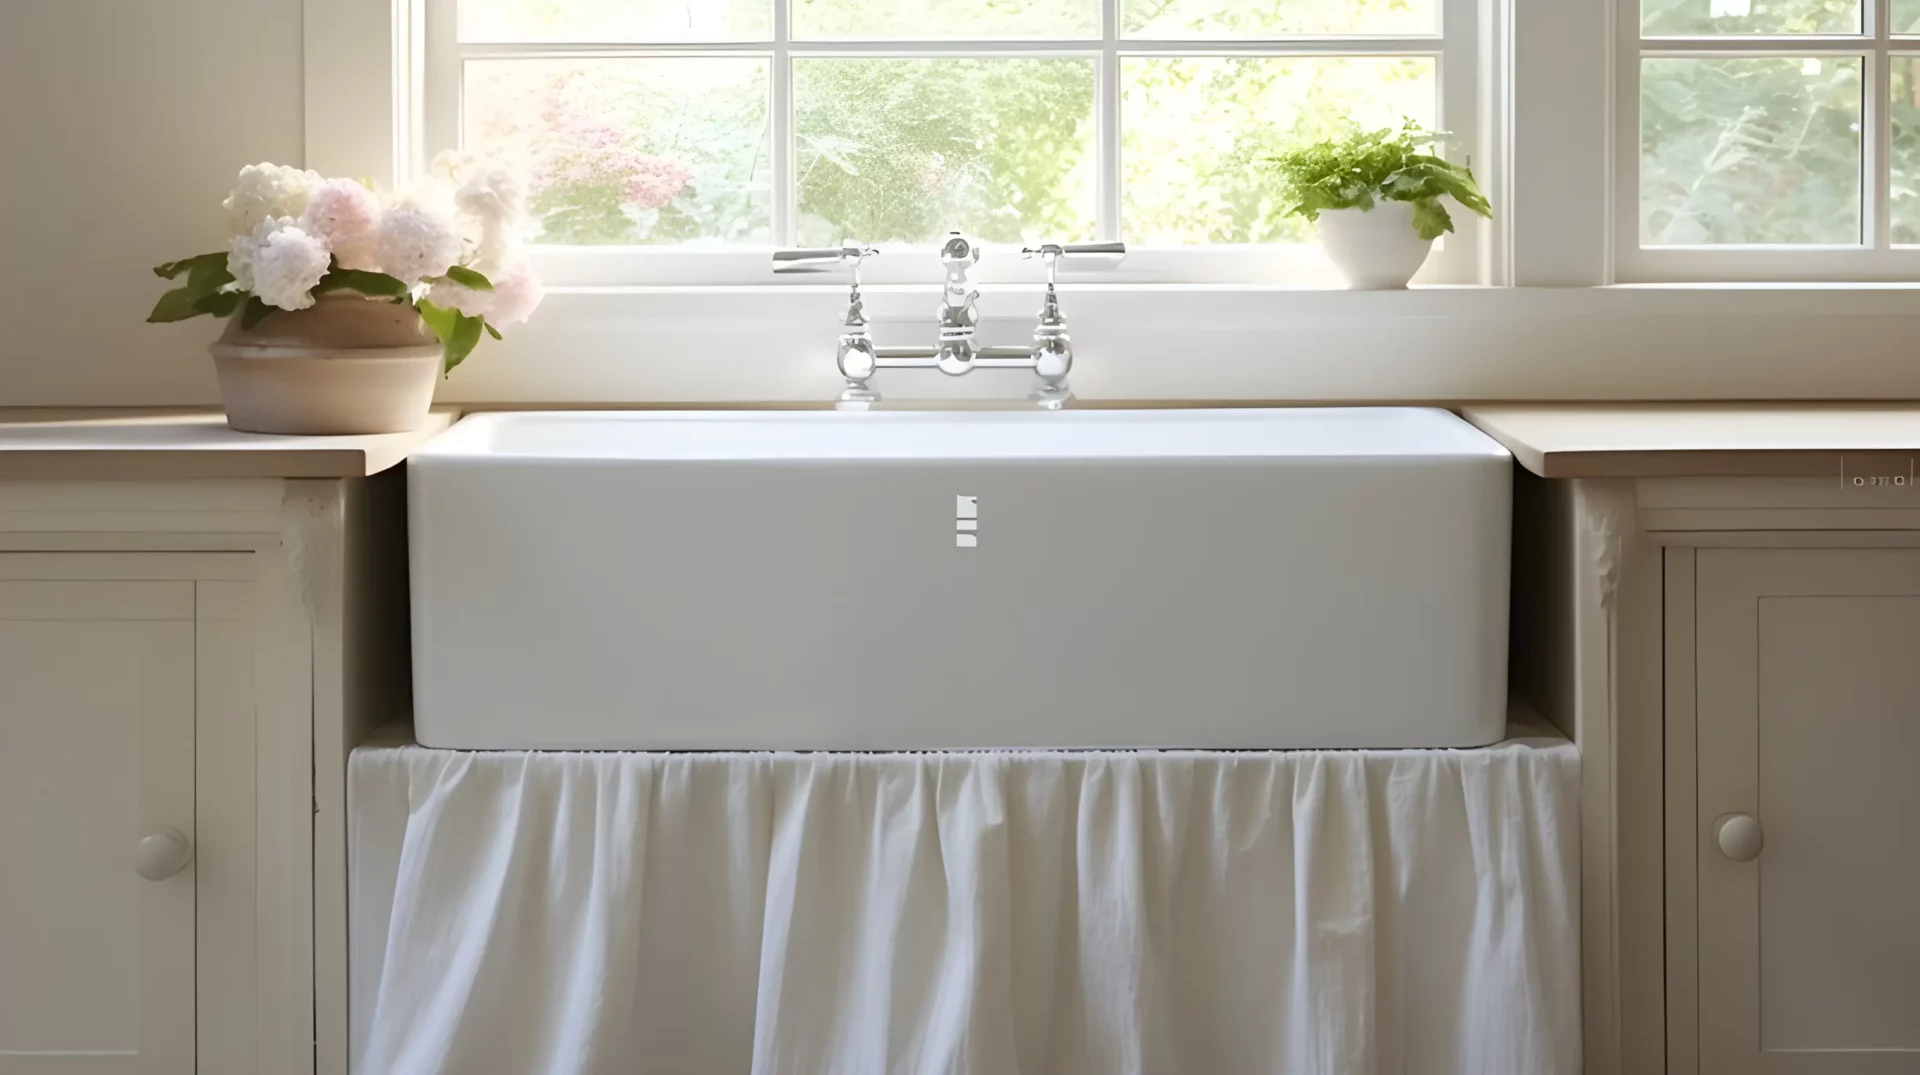 Small blue bathroom decorating ideas: A white kitchen sink with a white ruffled valance.